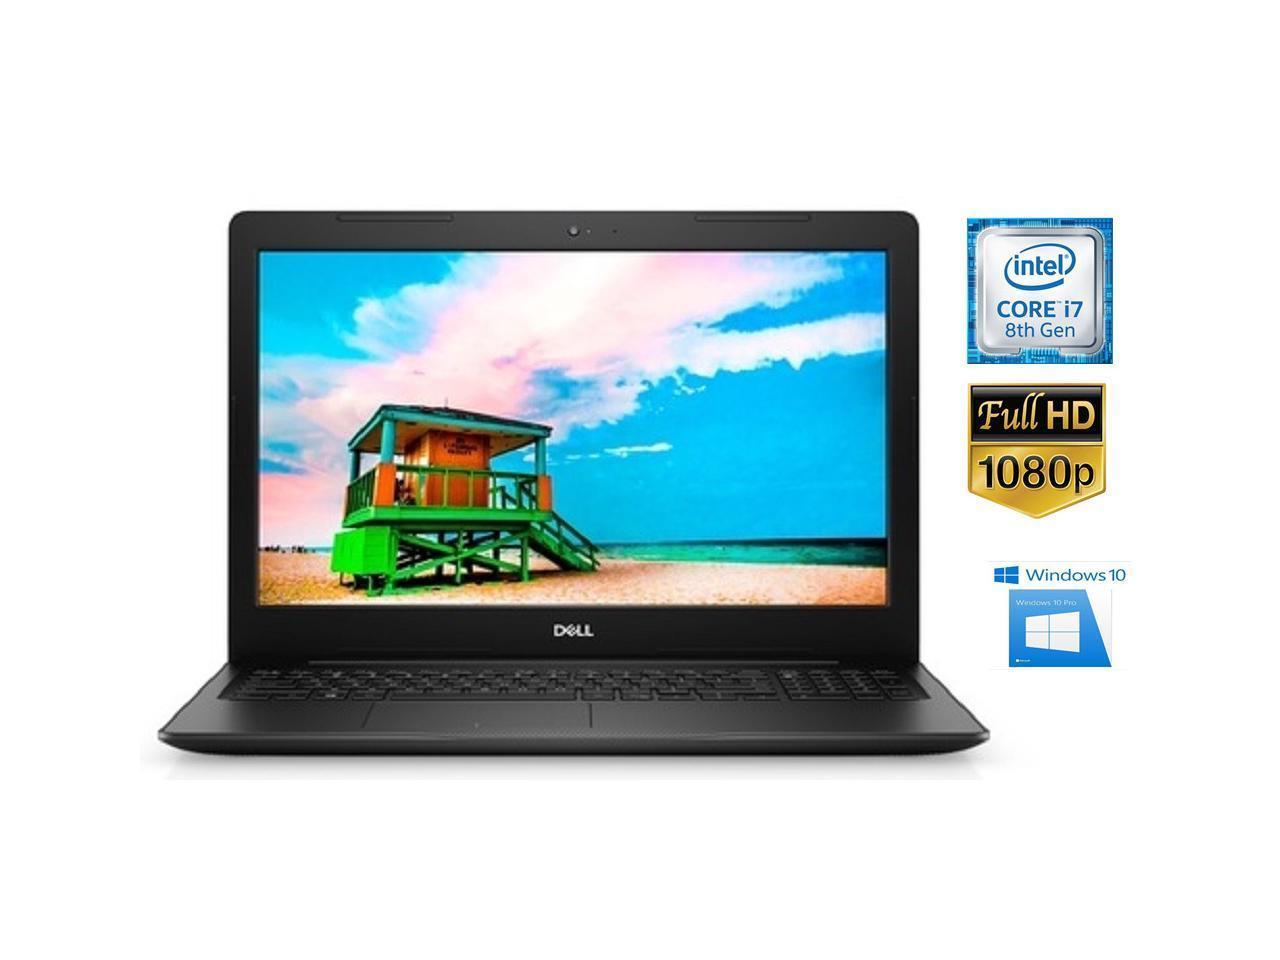 Used Like New Dell G3 15 6 Gaming Laptop Intel Core I7 16gb Memory Nvidia Geforce Gtx 1660ti 512gb Ssd Notebook Pc Computer I3590 7957blk Pus Newegg Com